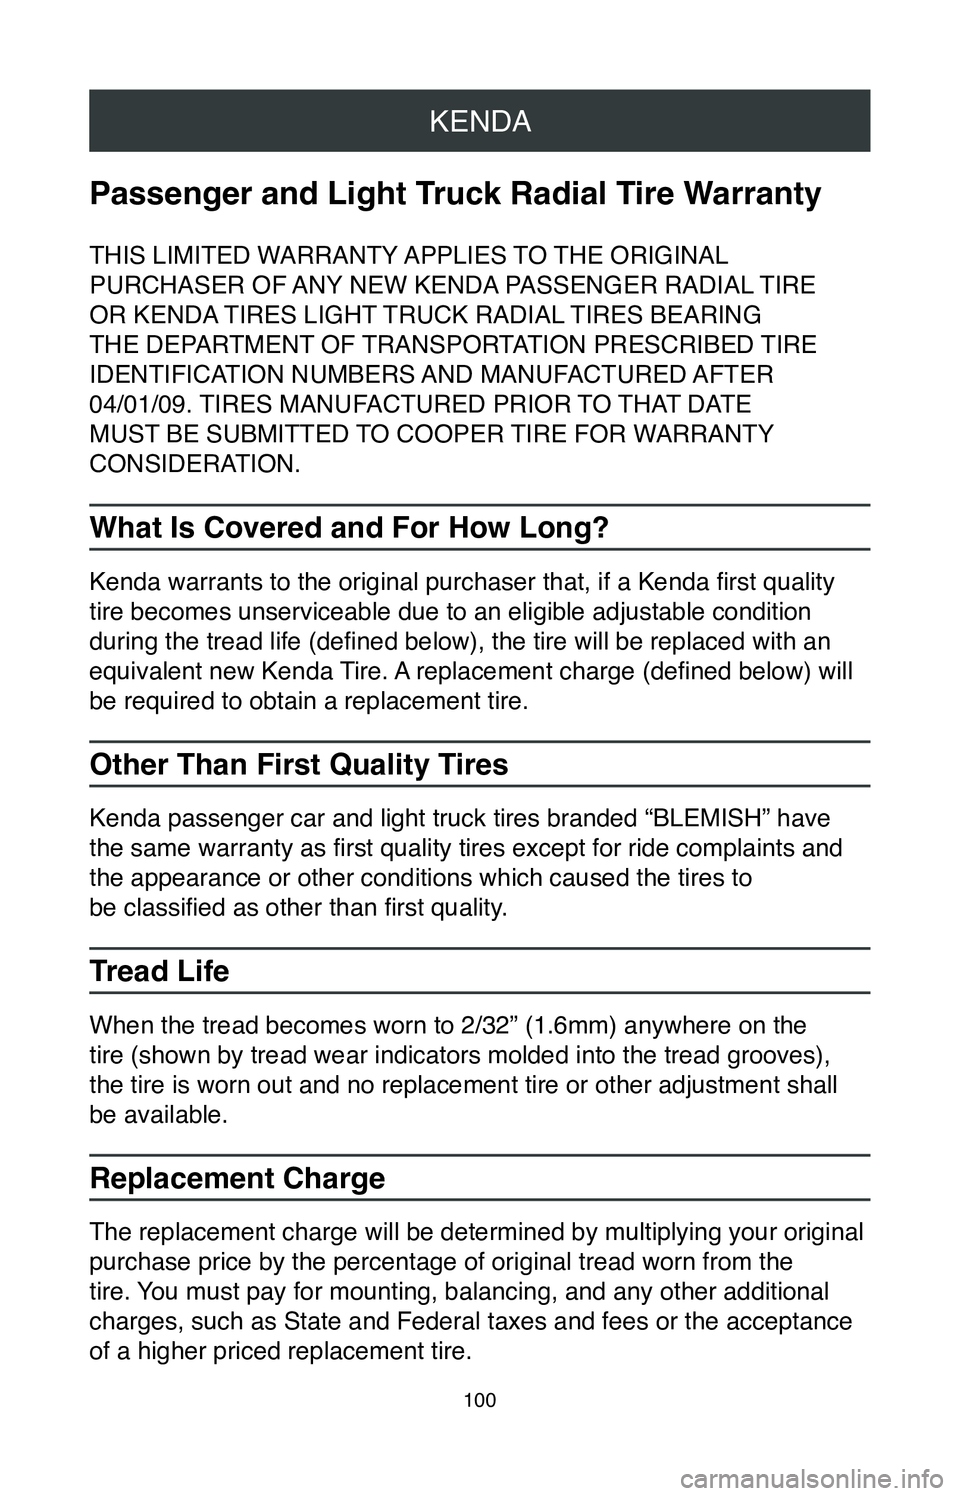 TOYOTA COROLLA 2020  Warranties & Maintenance Guides (in English) KENDA
100
Passenger and Light Truck Radial Tire Warranty
THIS LIMITED WARRANTY APPLIES TO THE ORIGINAL 
PURCHASER OF ANY NEW KENDA PASSENGER RADIAL TIRE 
OR KENDA TIRES LIGHT TRUCK RADIAL TIRES BEARIN